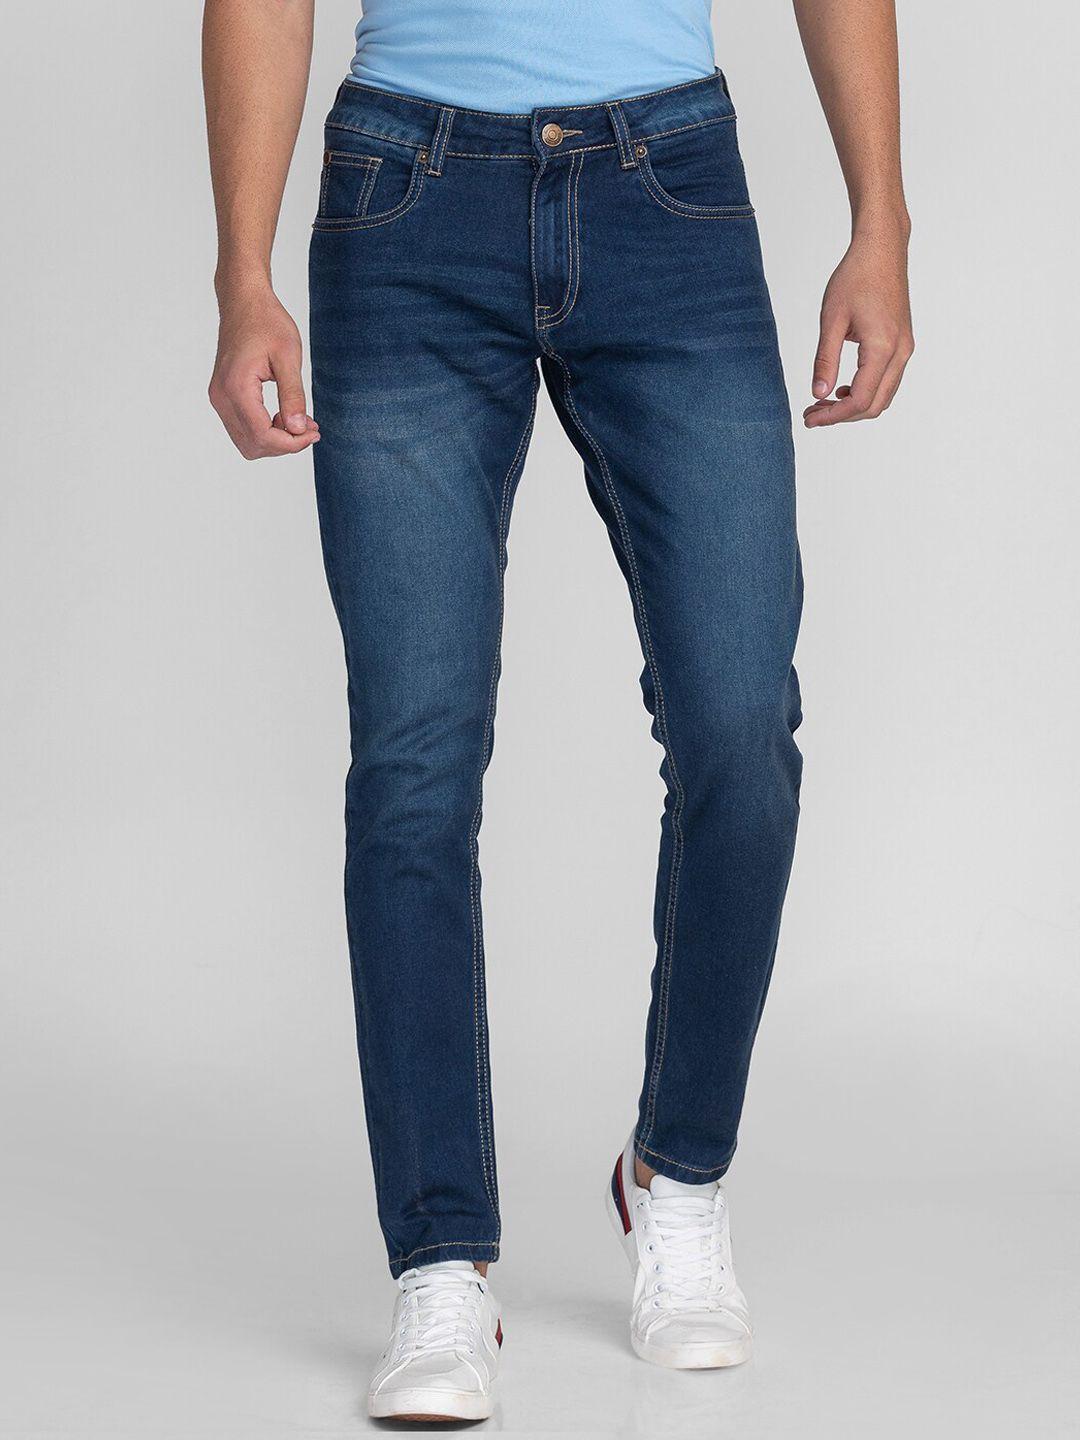 giordano men slim fit light fade stretchable cotton jeans